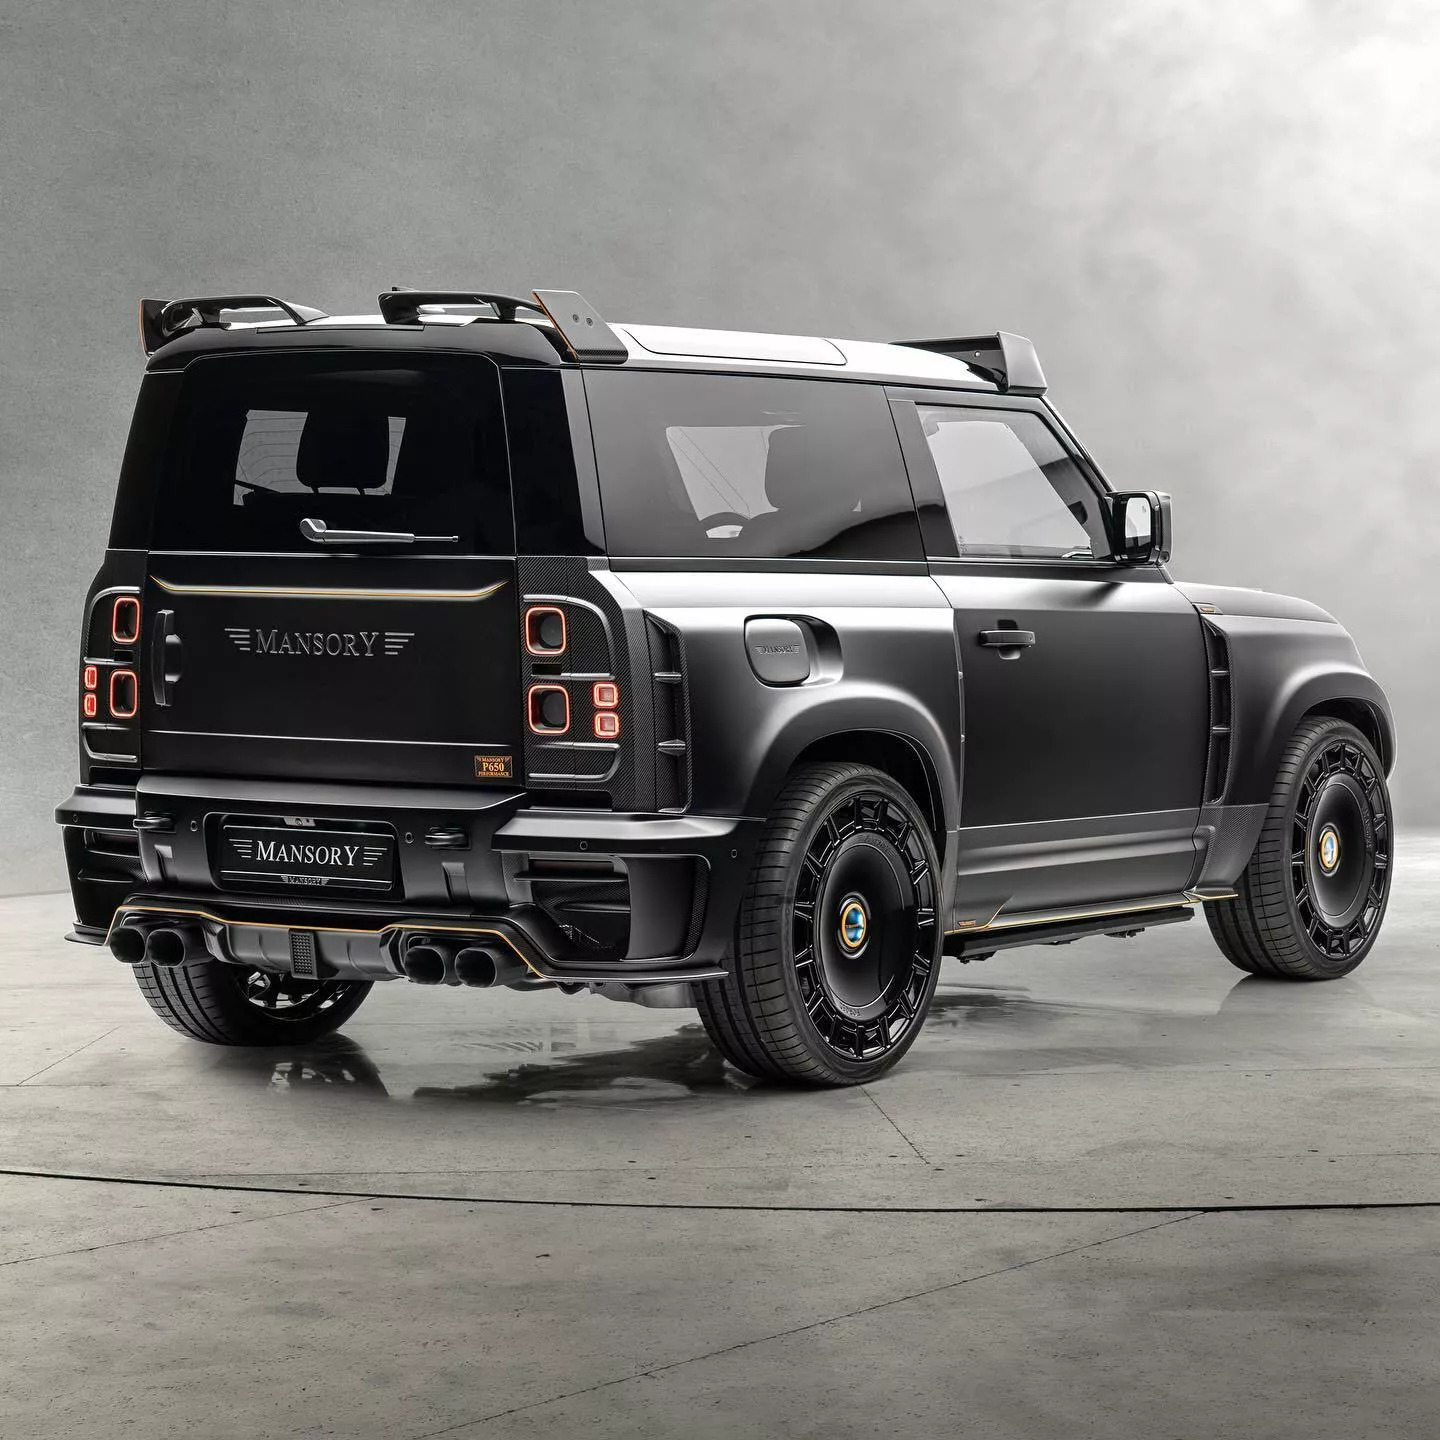 Check out the cool Mansory modified Land Rover Defender mansory-land-rover-defender-4.webp